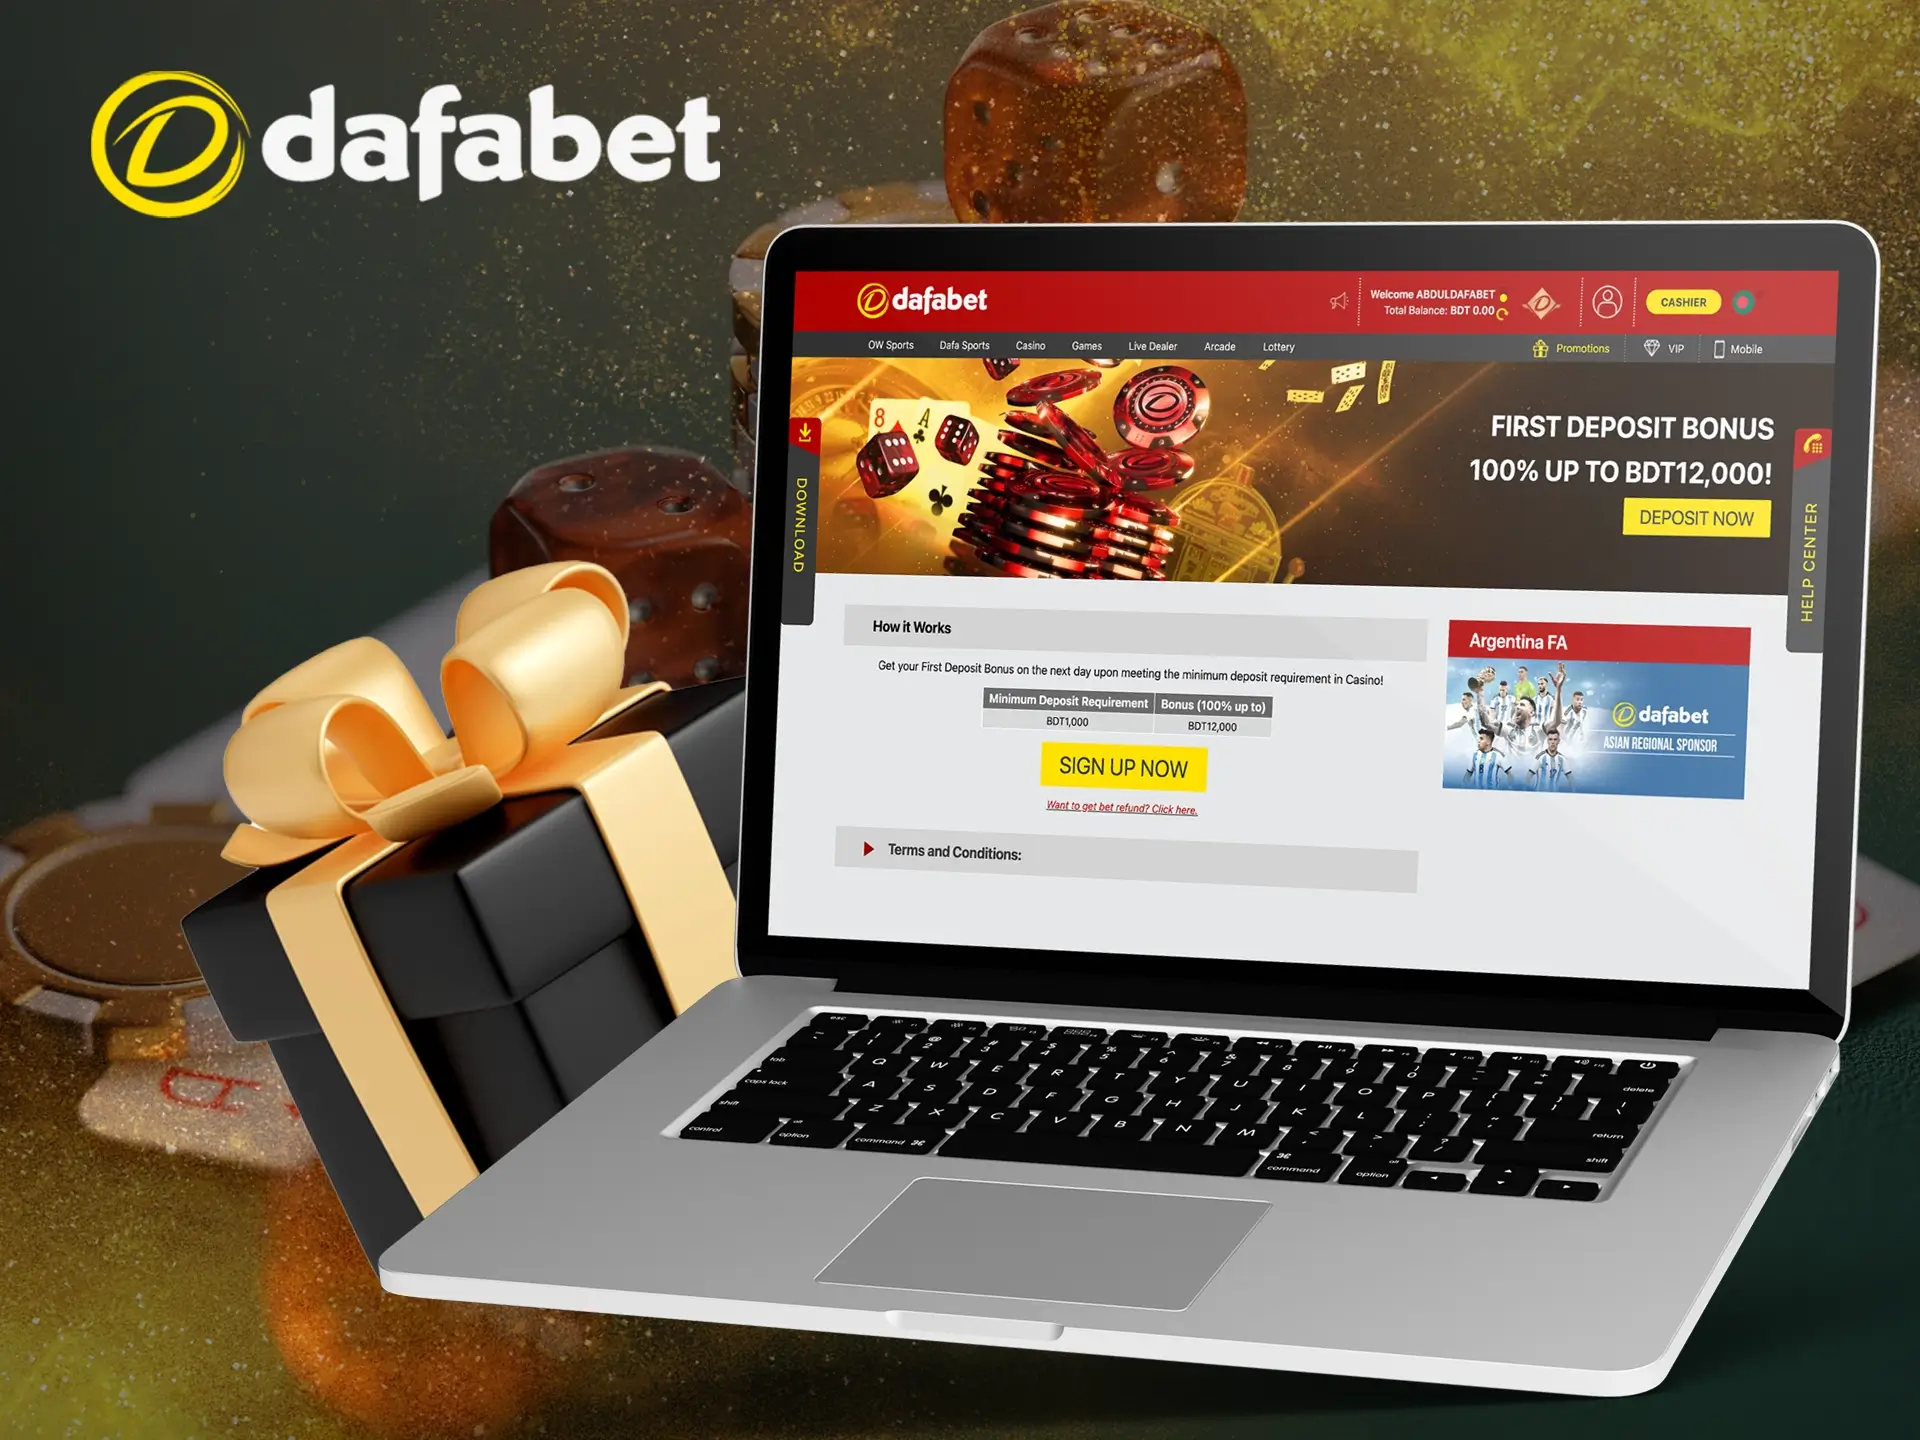 Dafabet's welcome bonus will help you get your start in the casino world.